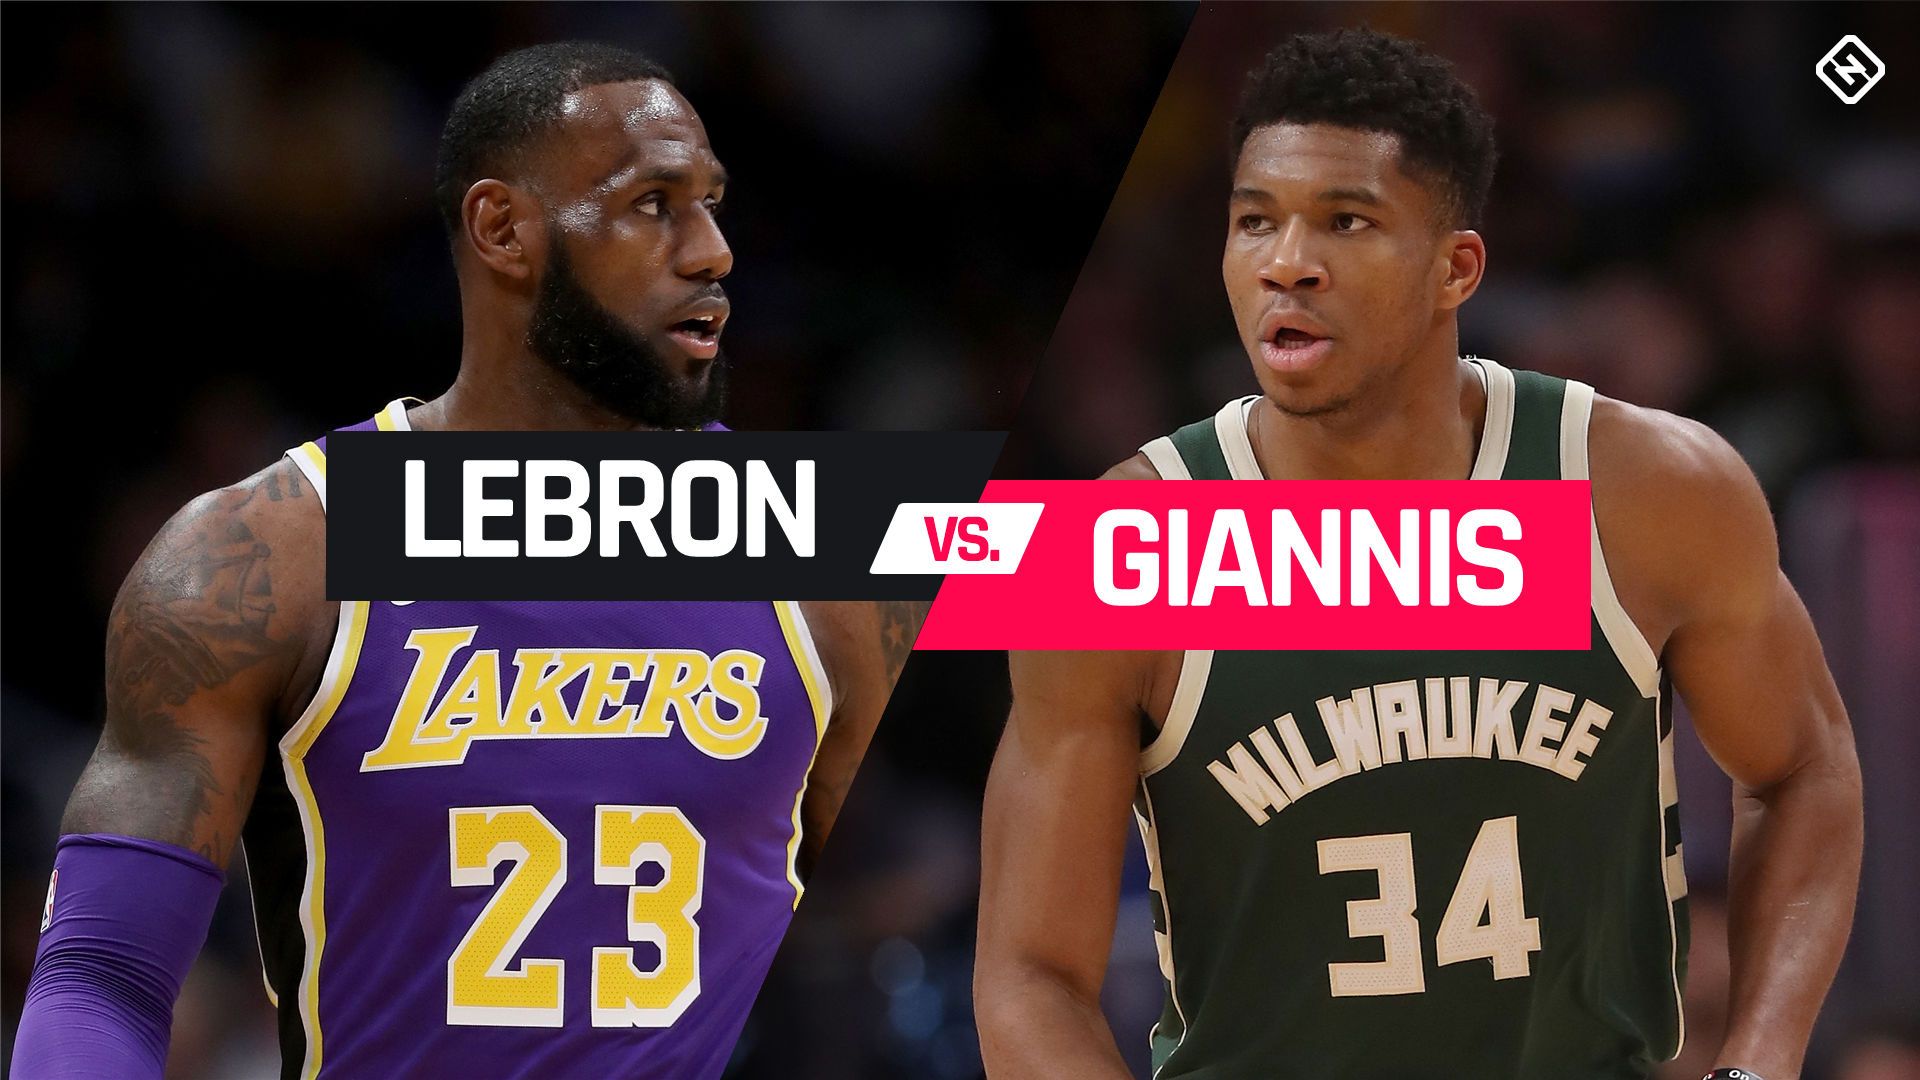 NBA All Star Draft Results 2020: Picks, Rosters For Team LeBron, Team Giannis